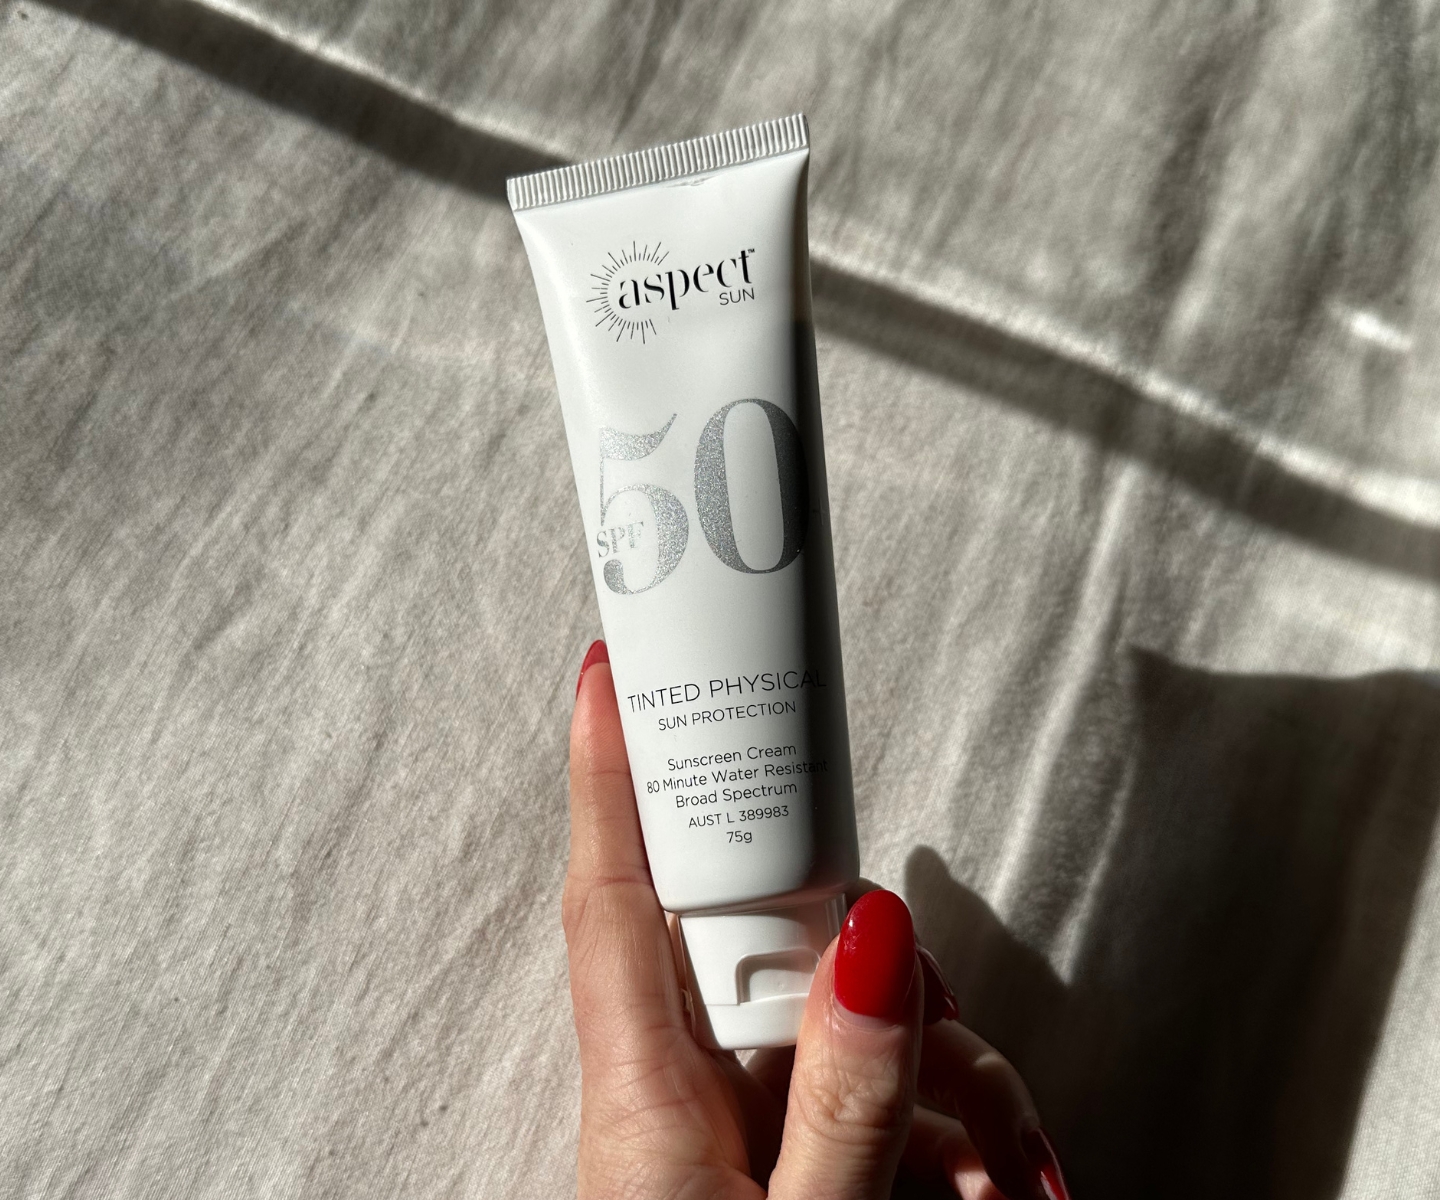 Aspect Sun Tinted Physical SPF 50 in-article pic